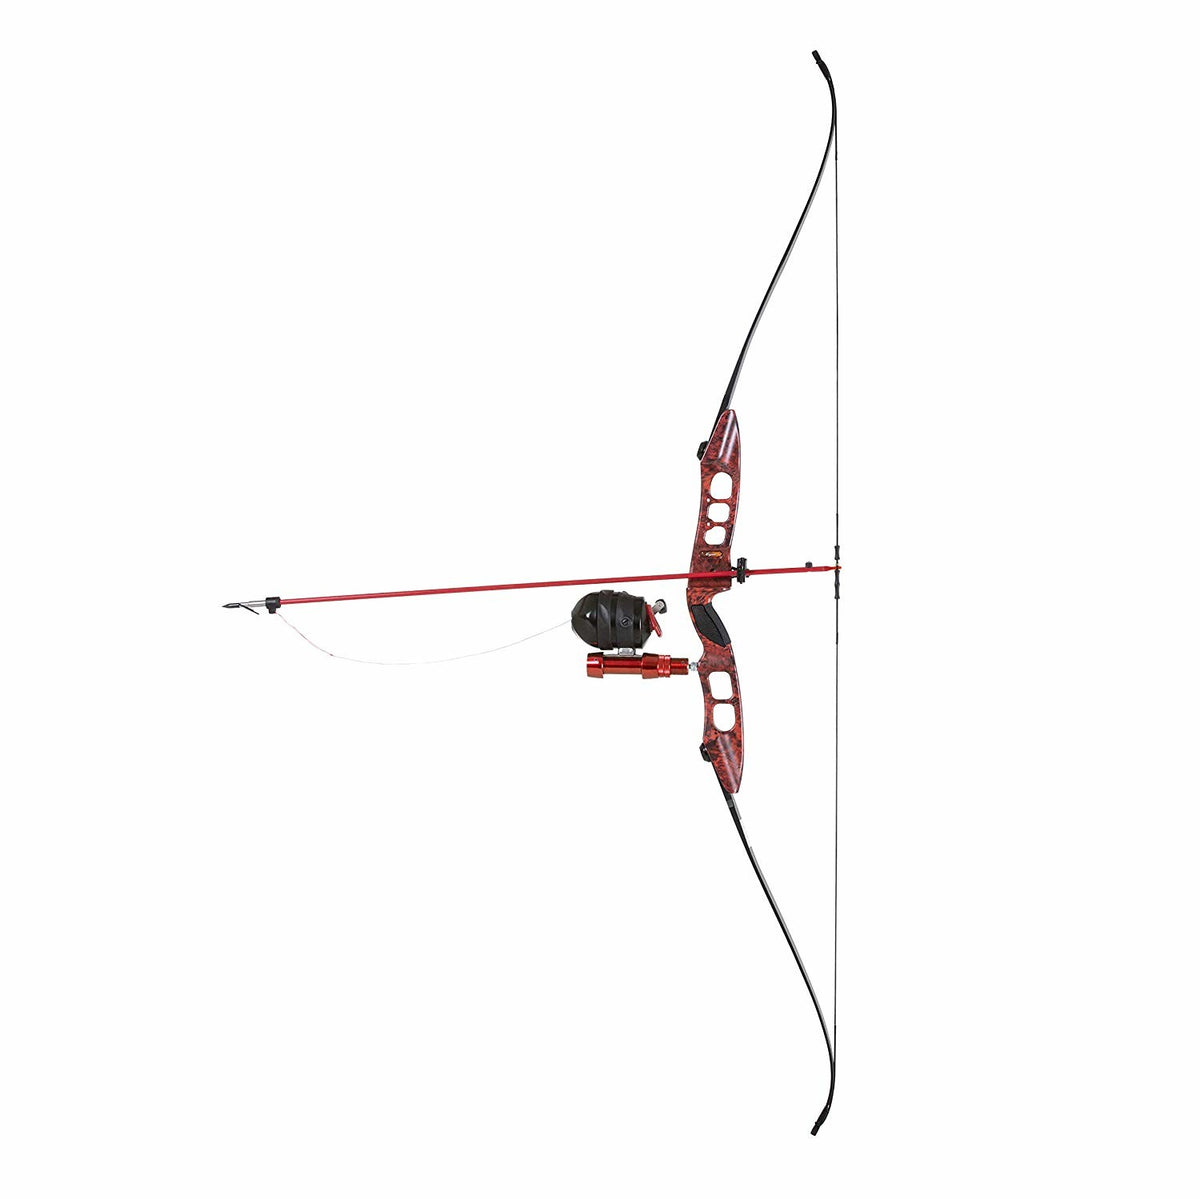 Fish Stick Bowfishing Bow Package with Drum Reel, Roller Rest, and